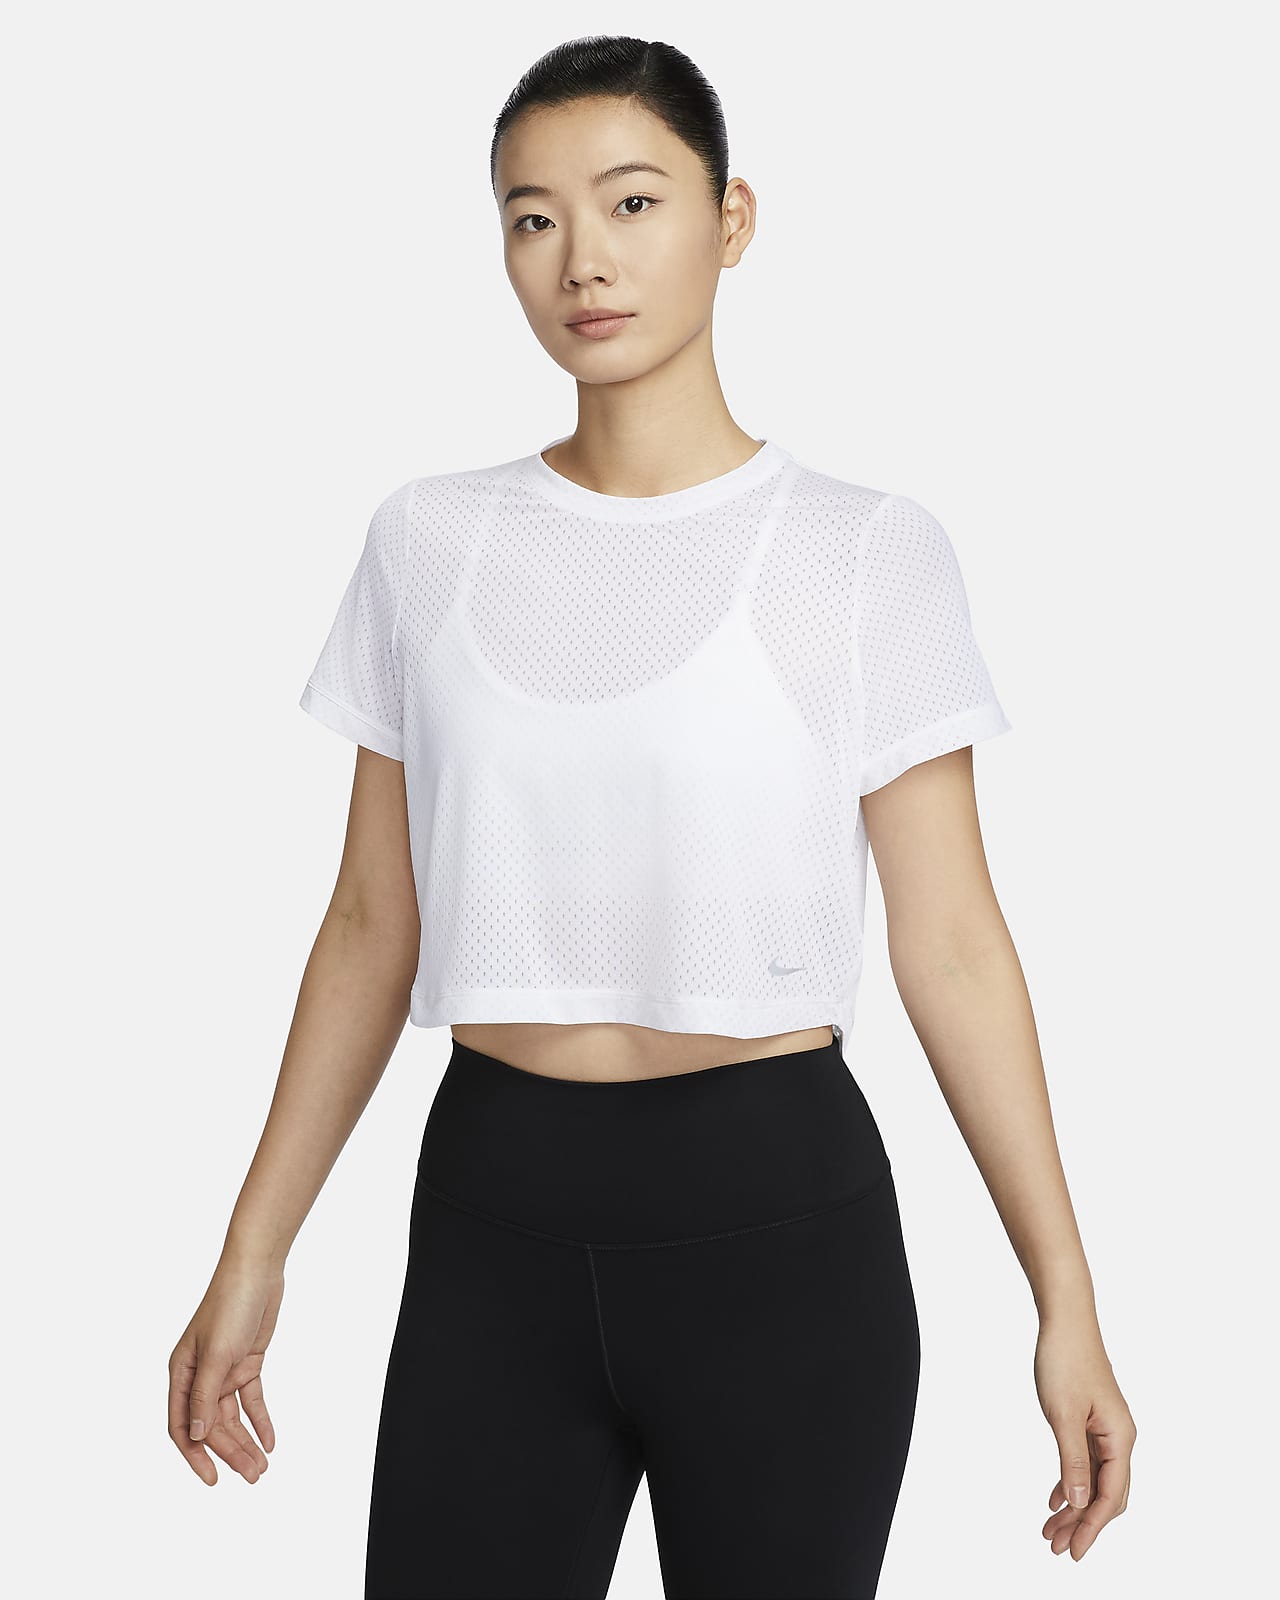 Nike One Classic Breathable Women's Dri-FIT Short-Sleeve Top